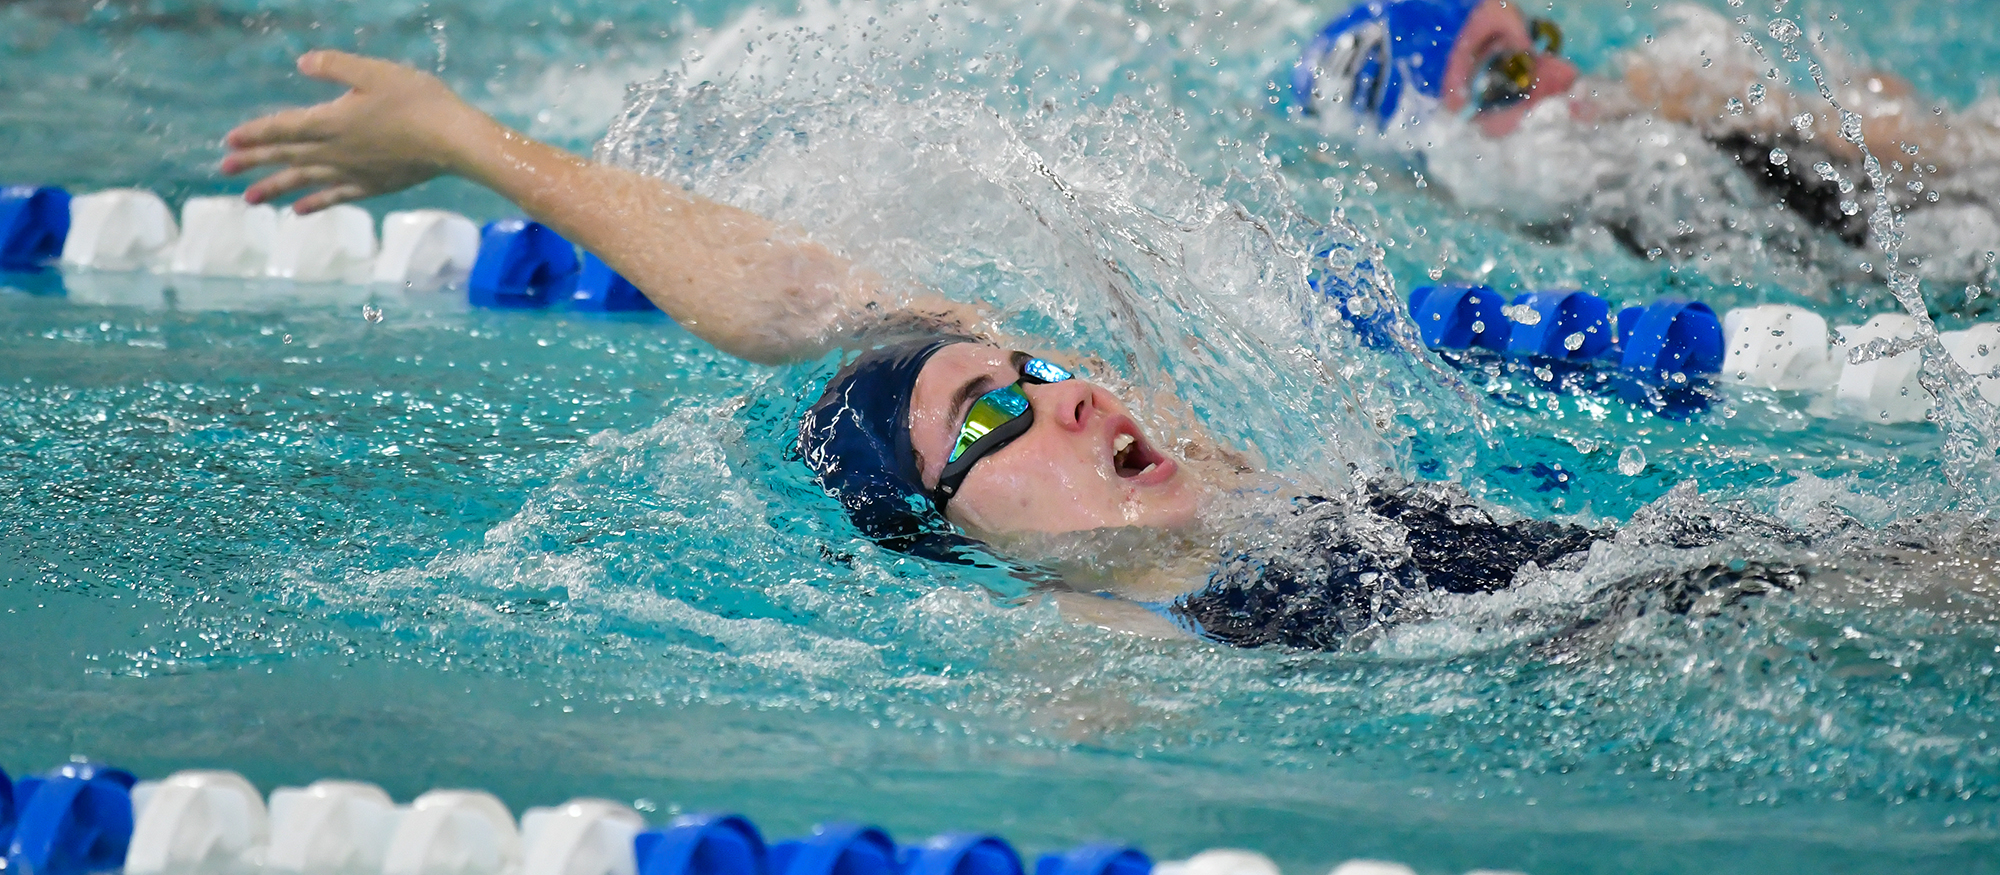 Anais Magner placed 12th in the 100-yard backstroke as Mount Holyoke took fifth place among seven teams at the Don Richards Invitational at RIT on Dec. 3, 2022. (RJB Sports file photo)